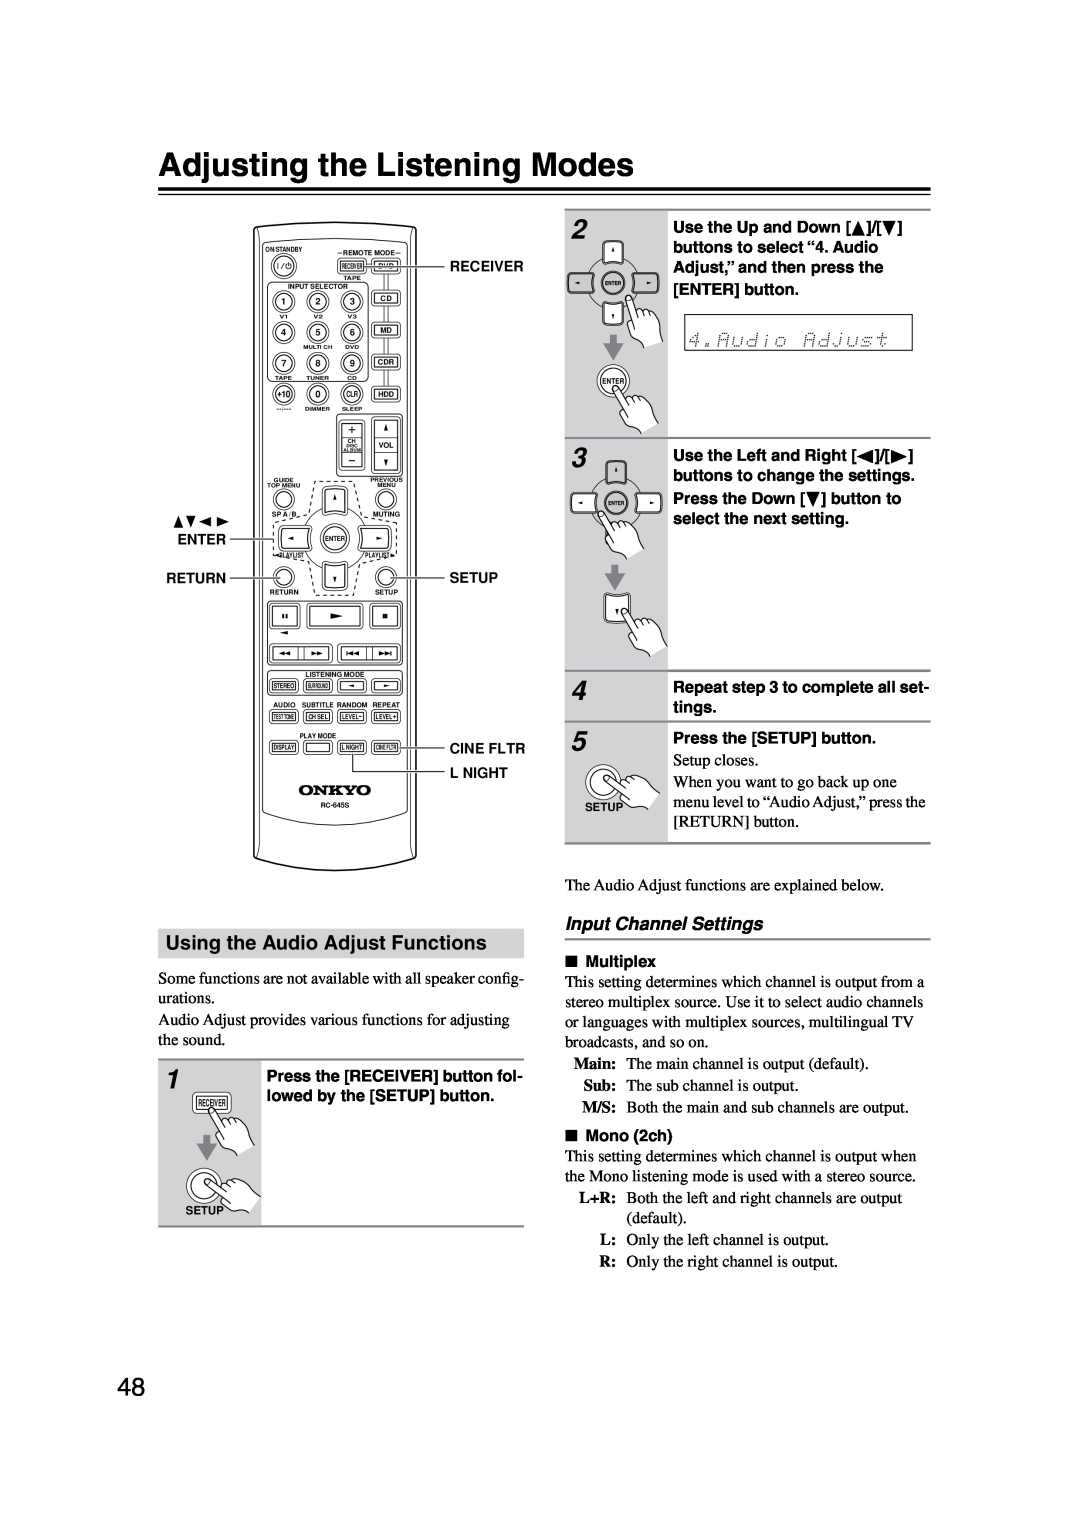 Onkyo TX-SR304 instruction manual Adjusting the Listening Modes, Using the Audio Adjust Functions, Input Channel Settings 